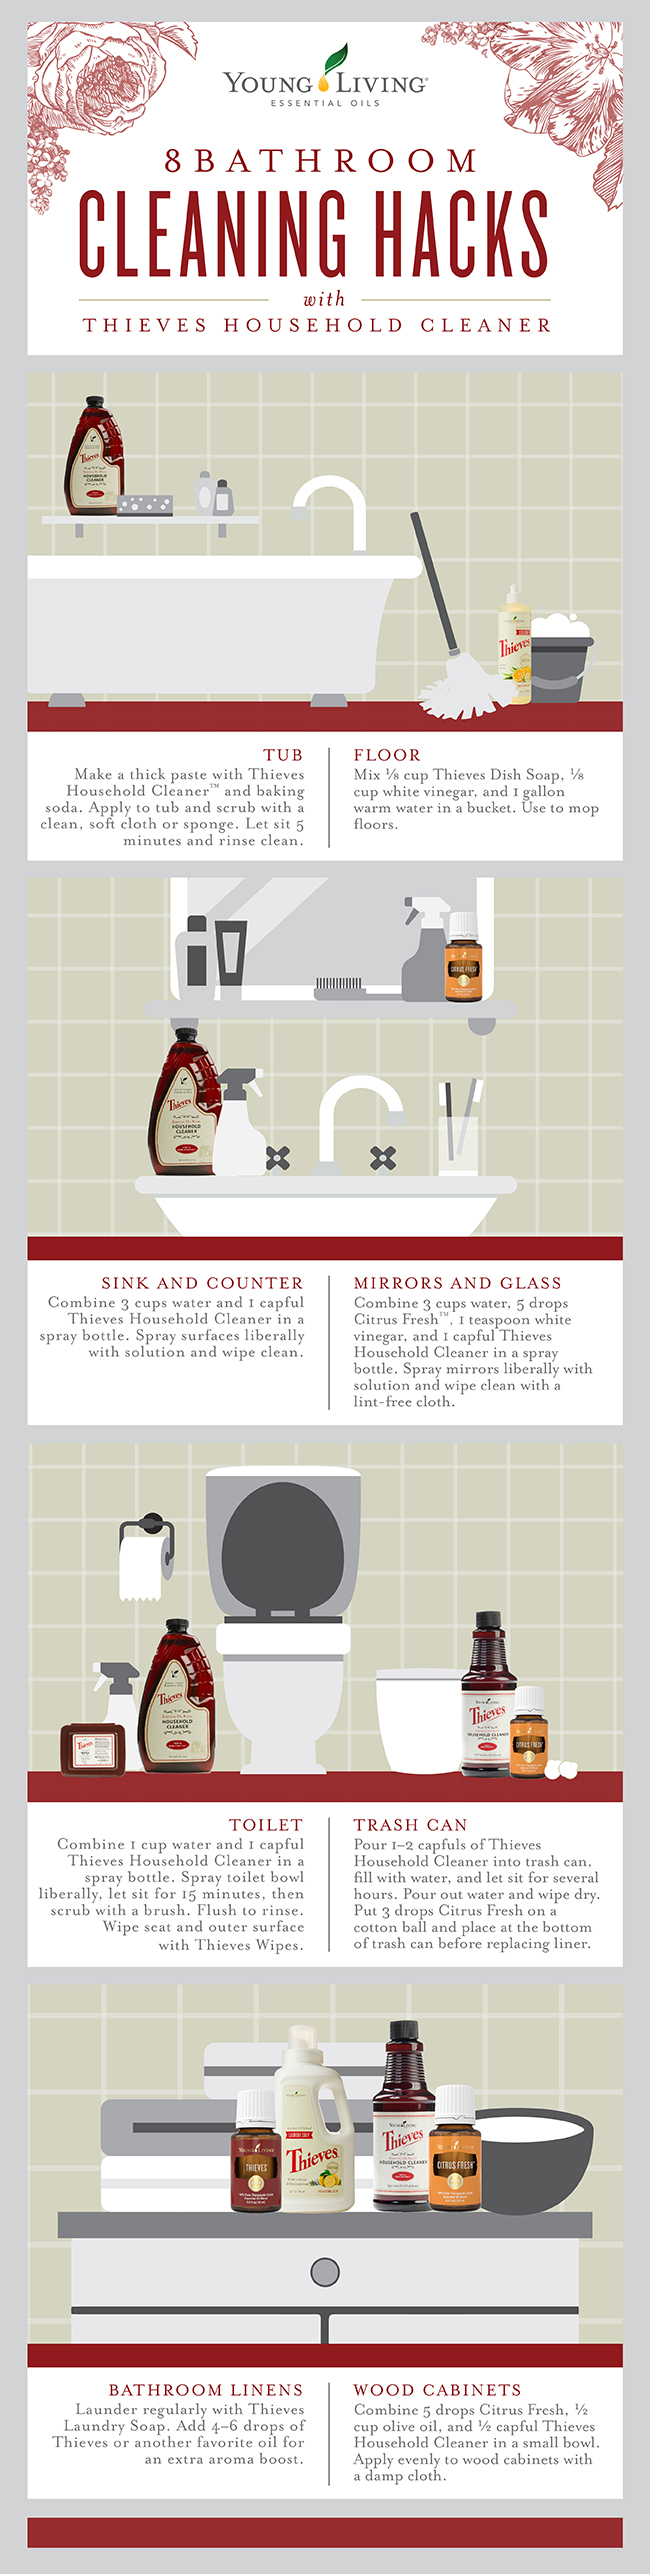 Bathroom hacks with Young Living Essential Oils